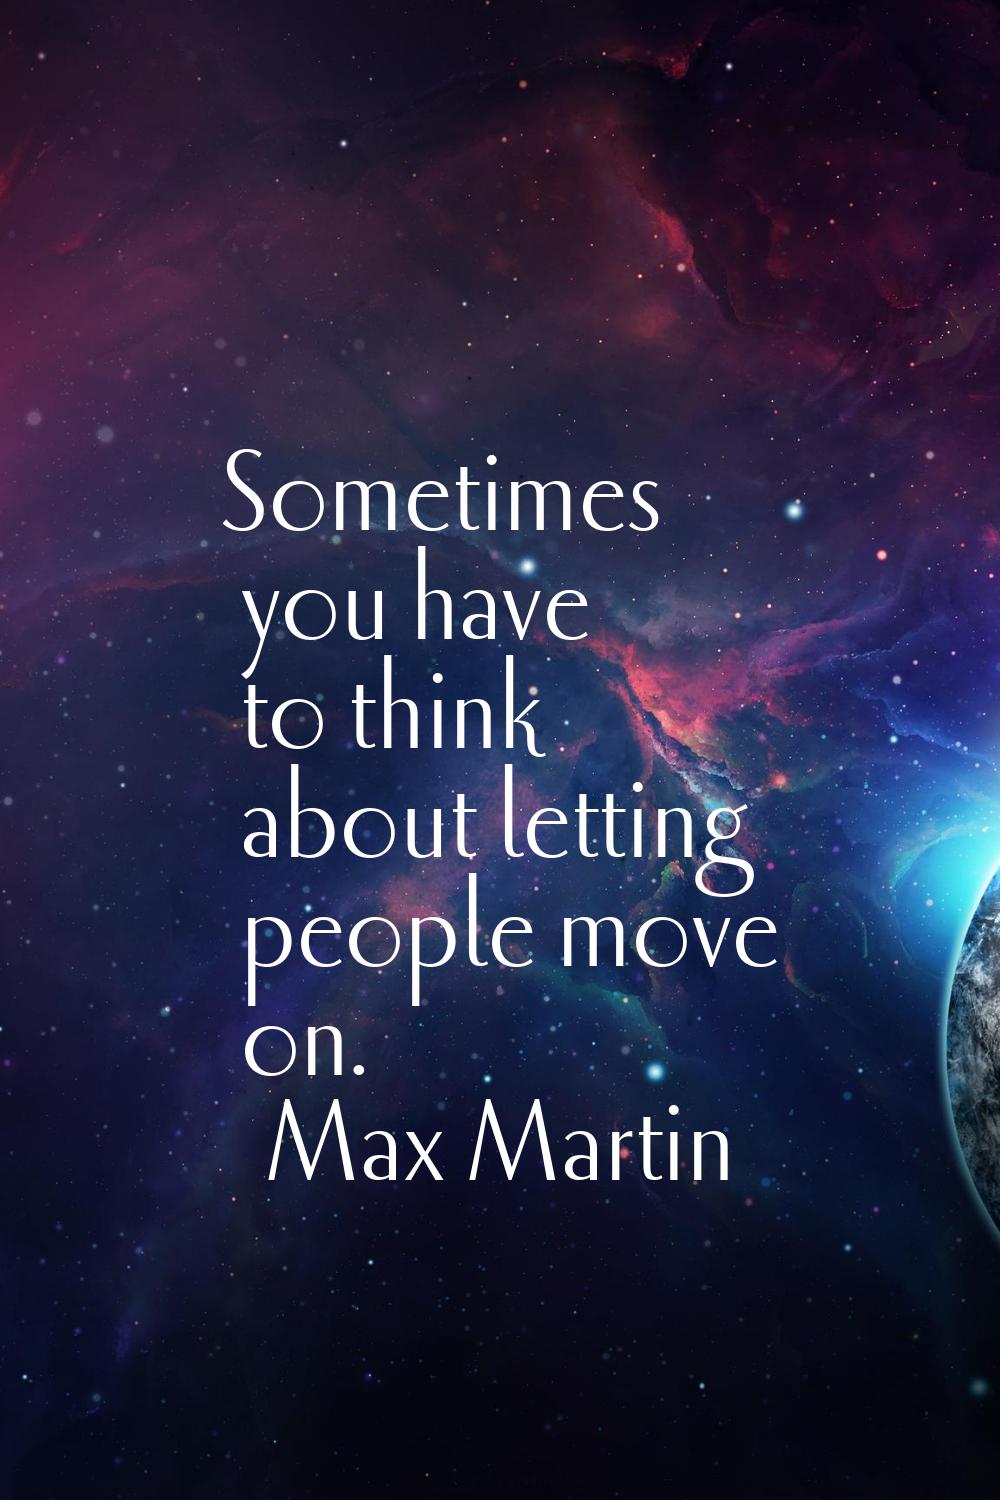 Sometimes you have to think about letting people move on.